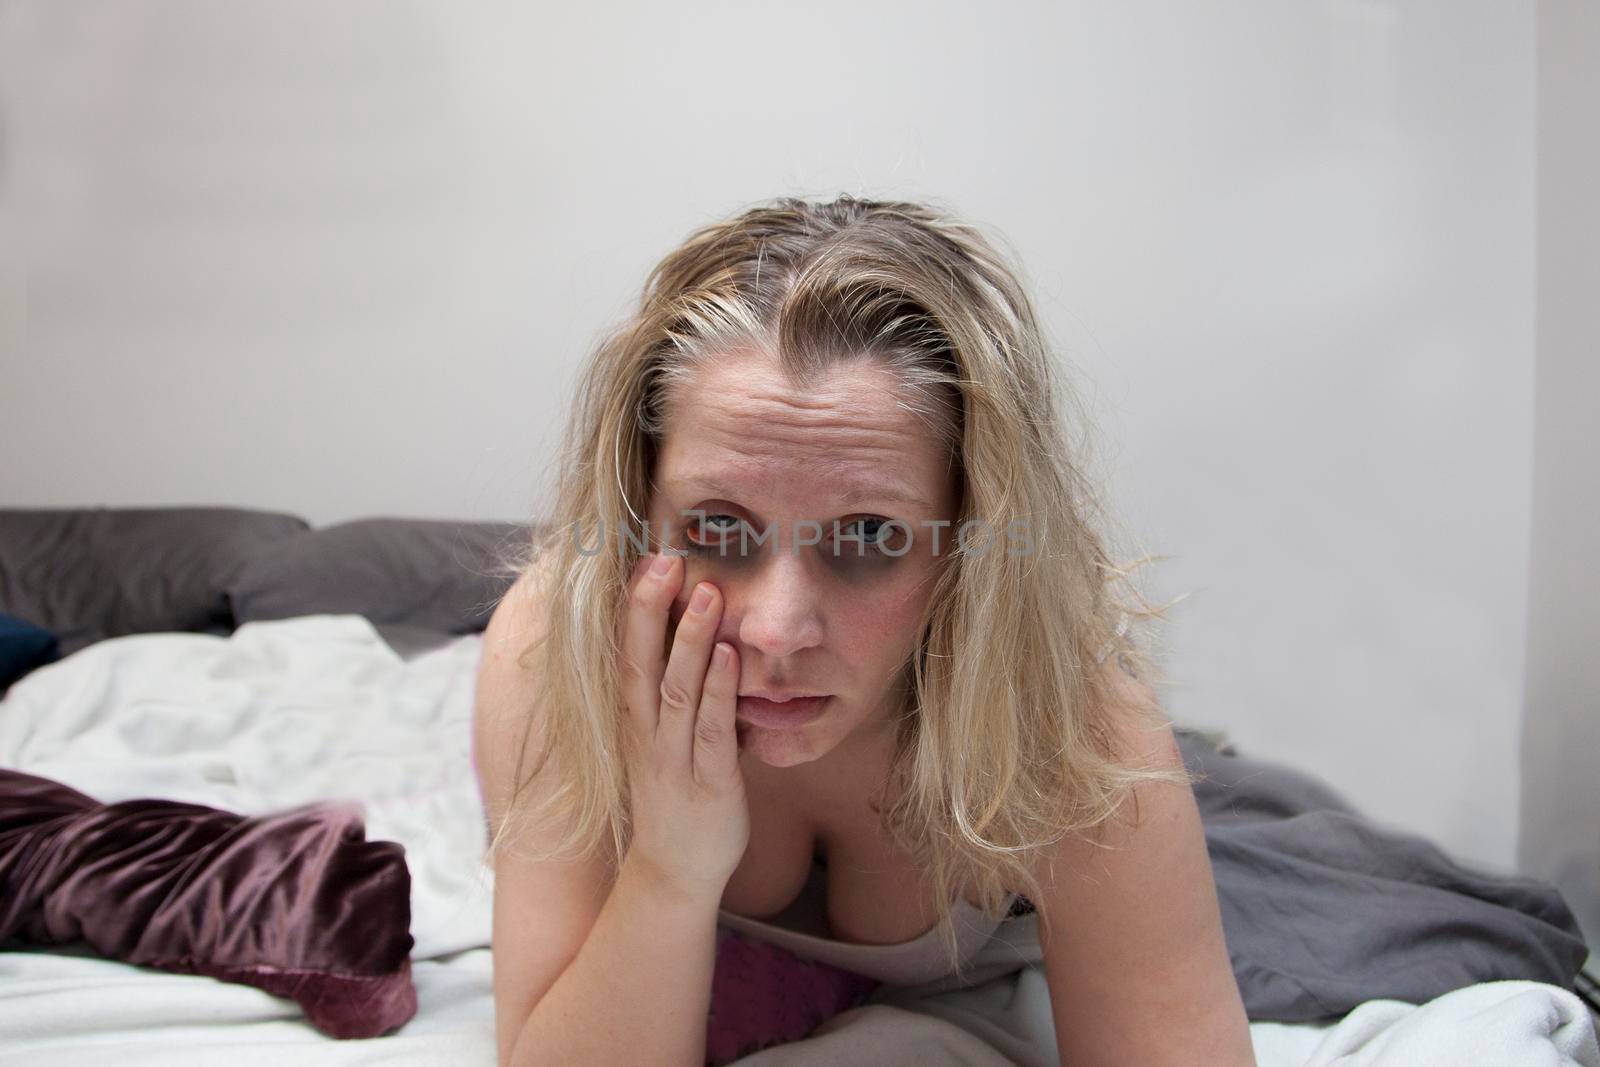  Woman looks confused and sick in bed, pulling on face with ill looking eyes